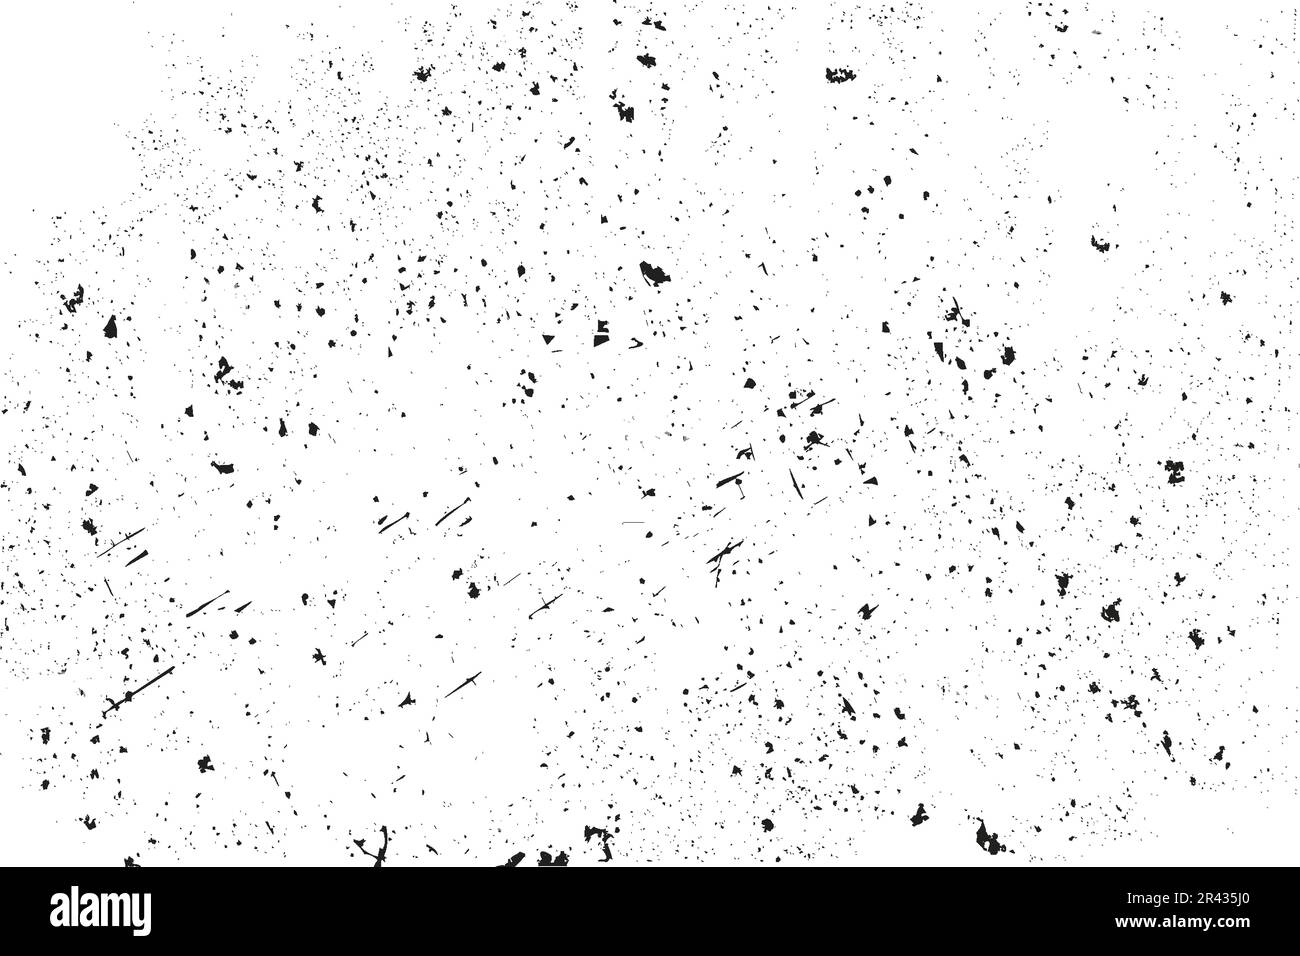 Stained Grunge Effect On A White Background Abstract Scratched And